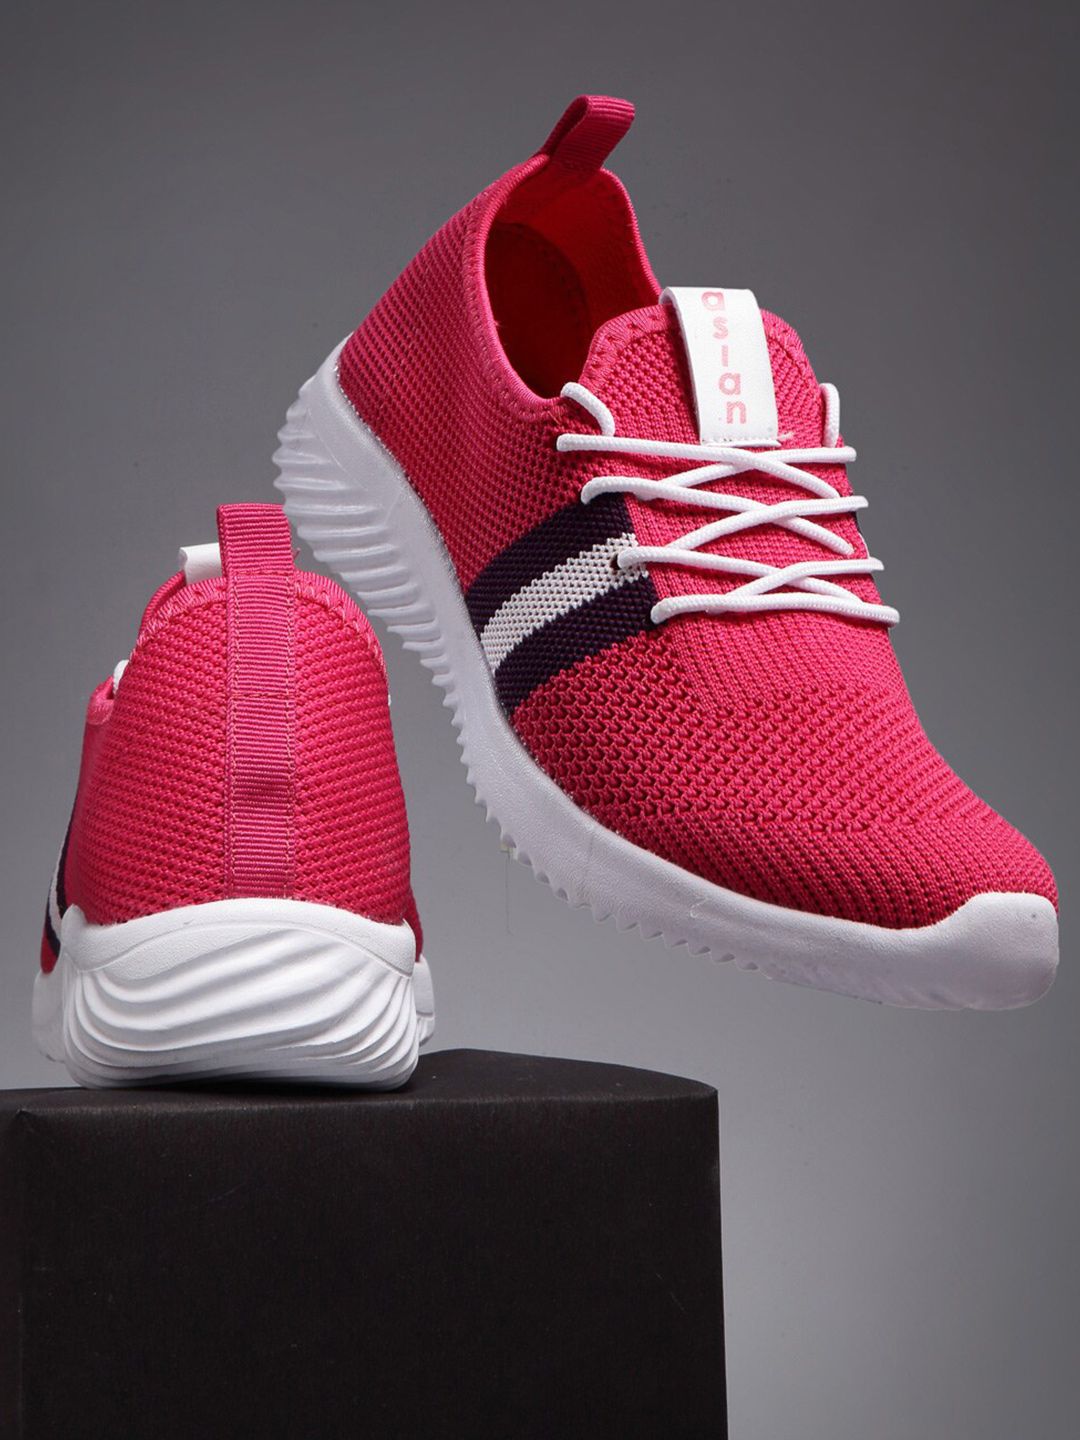 ASIAN Women Pink Running Shoes Price in India